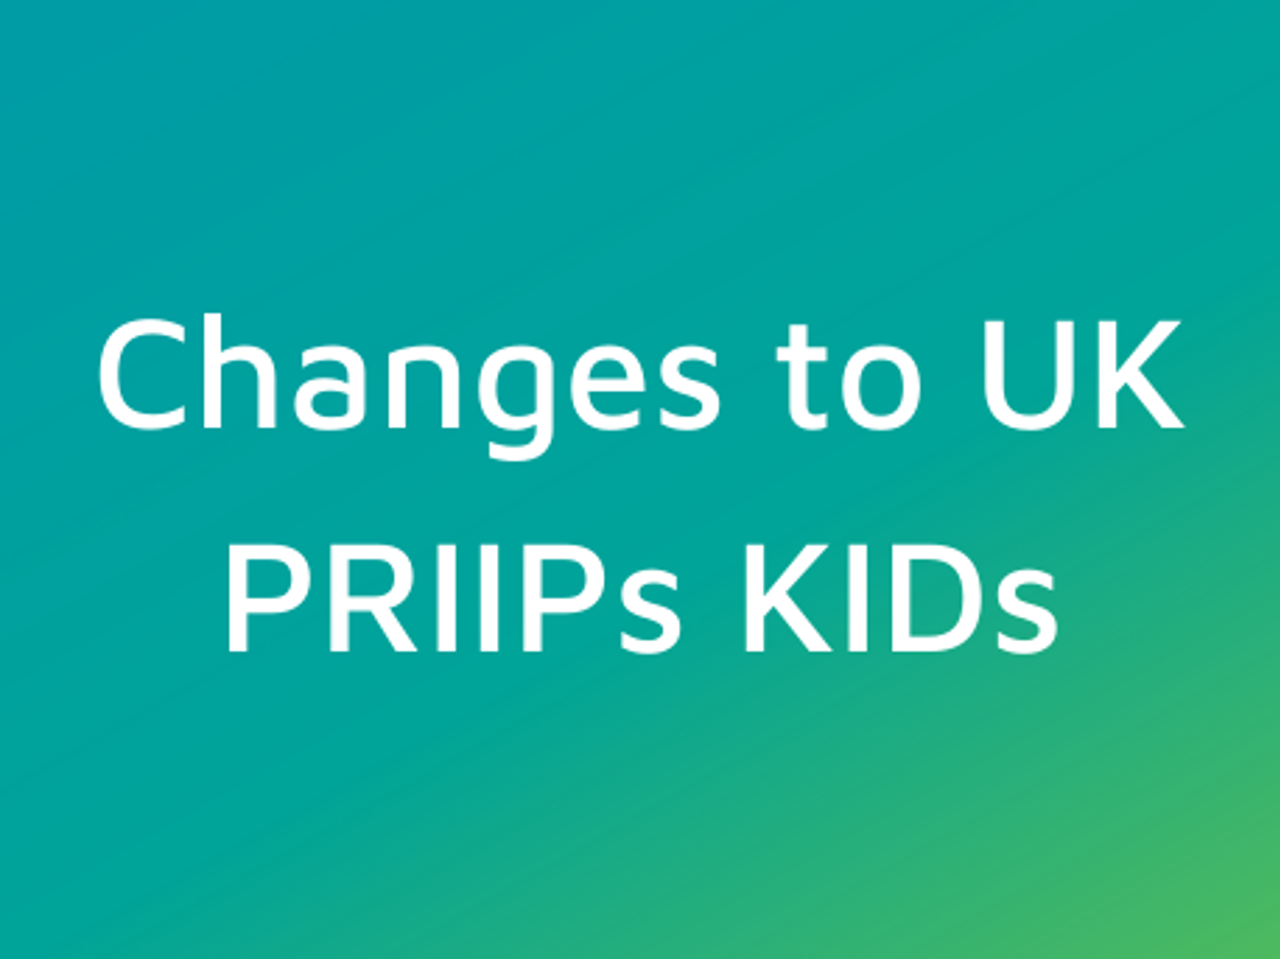 changes-to-uk-priips-kids.png